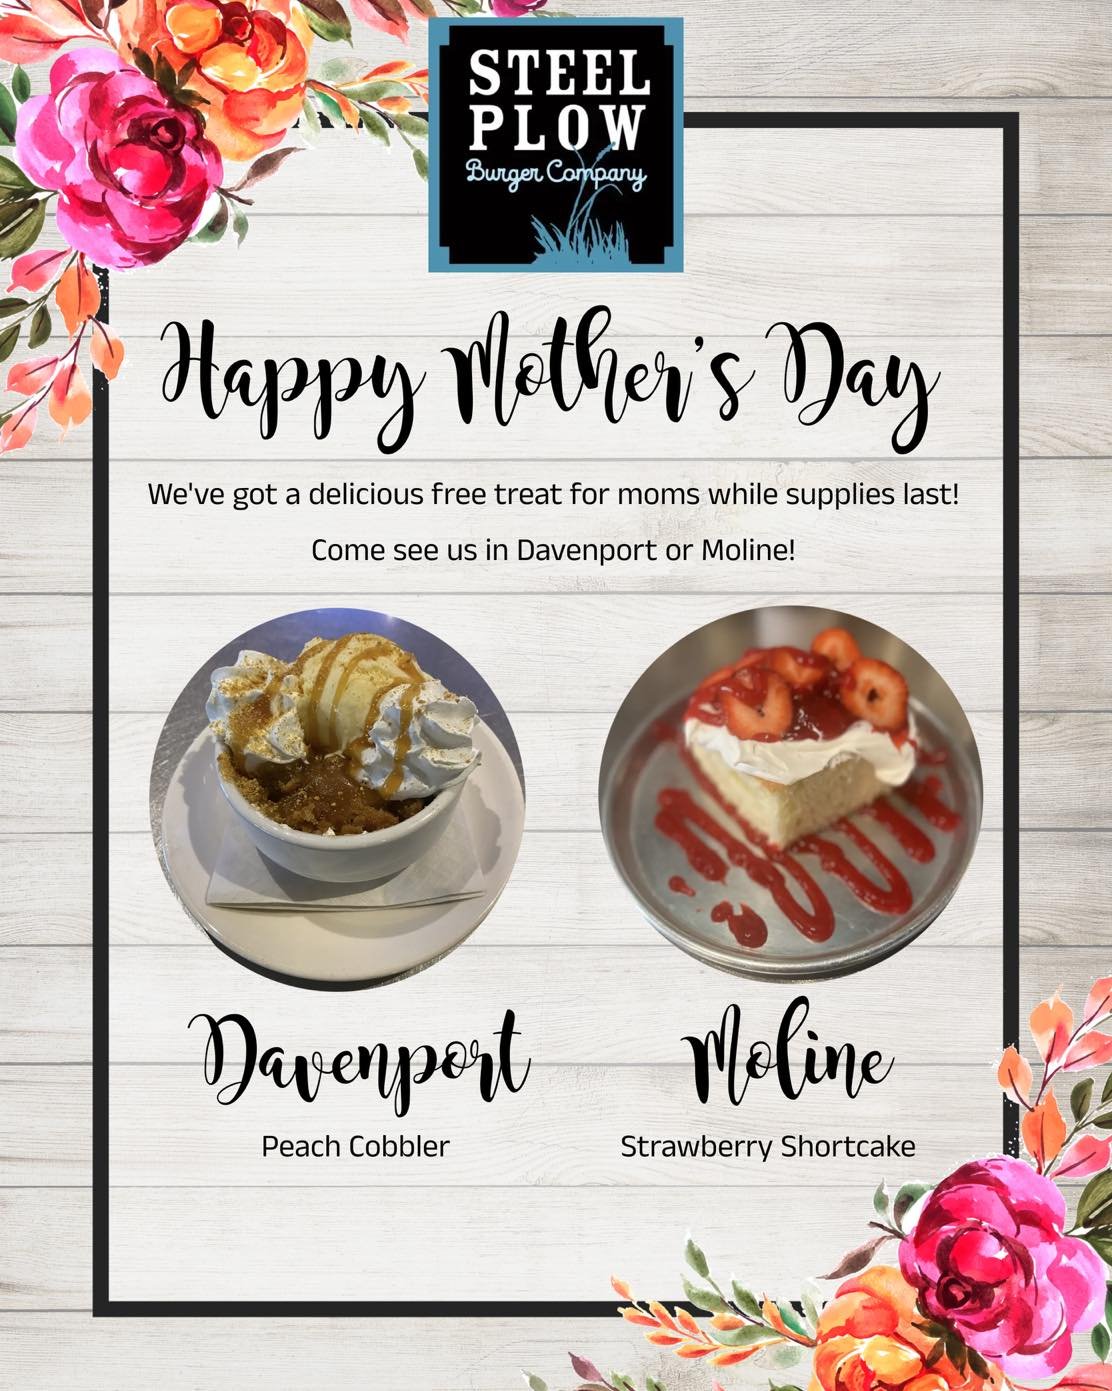 Bring mom to Steel Plow on Sunday for a delicious FREE treat while supplies last! 💐🍑🍓